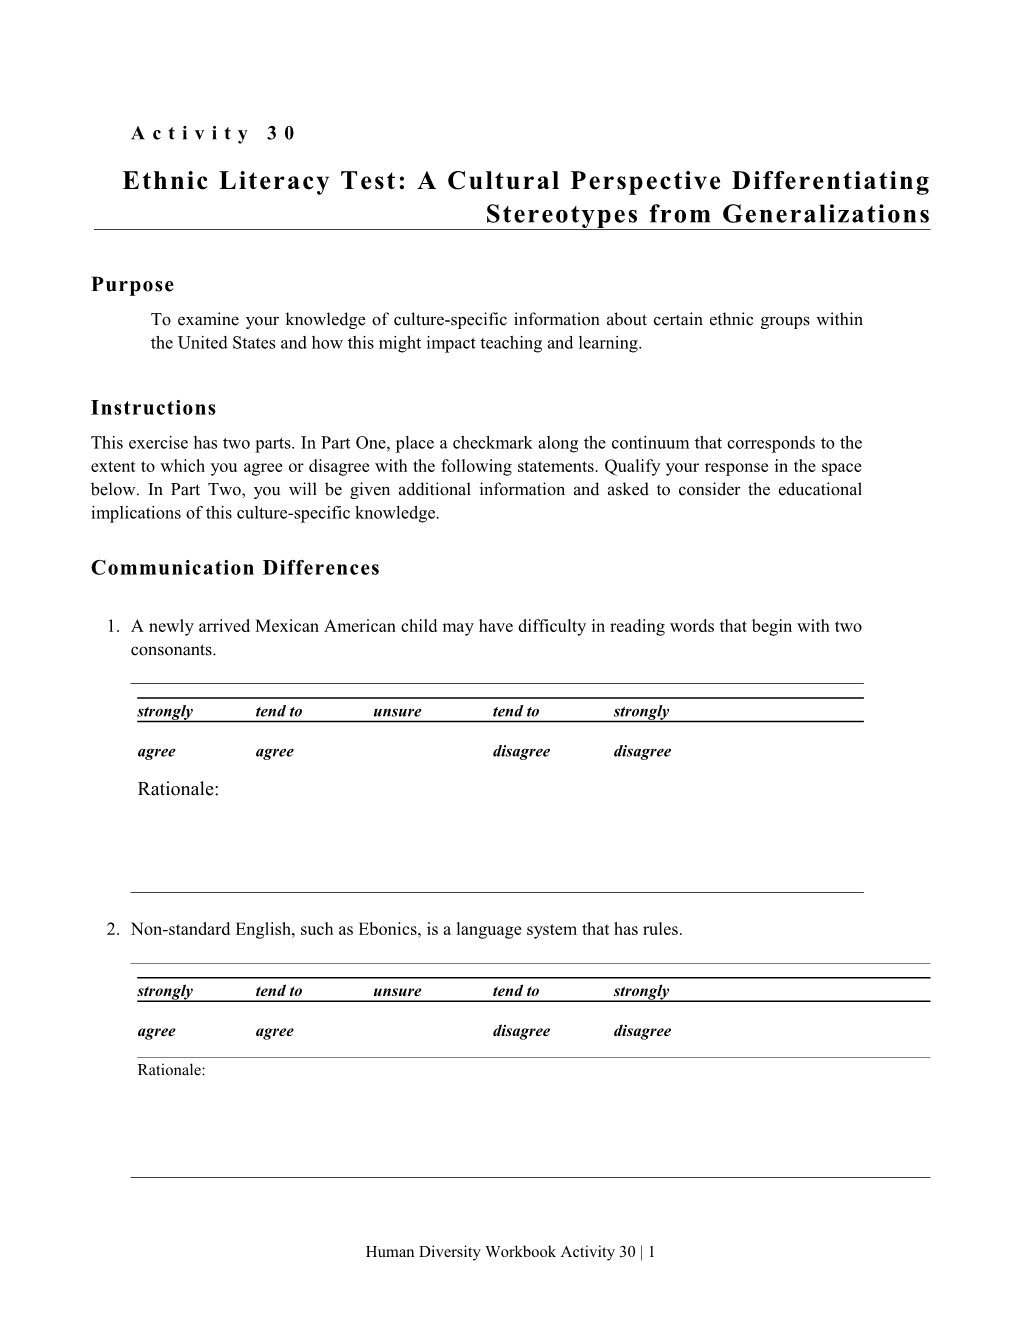 Ethnic Literacy Test: a Cultural Perspective Differentiating Stereotypes from Generalizations